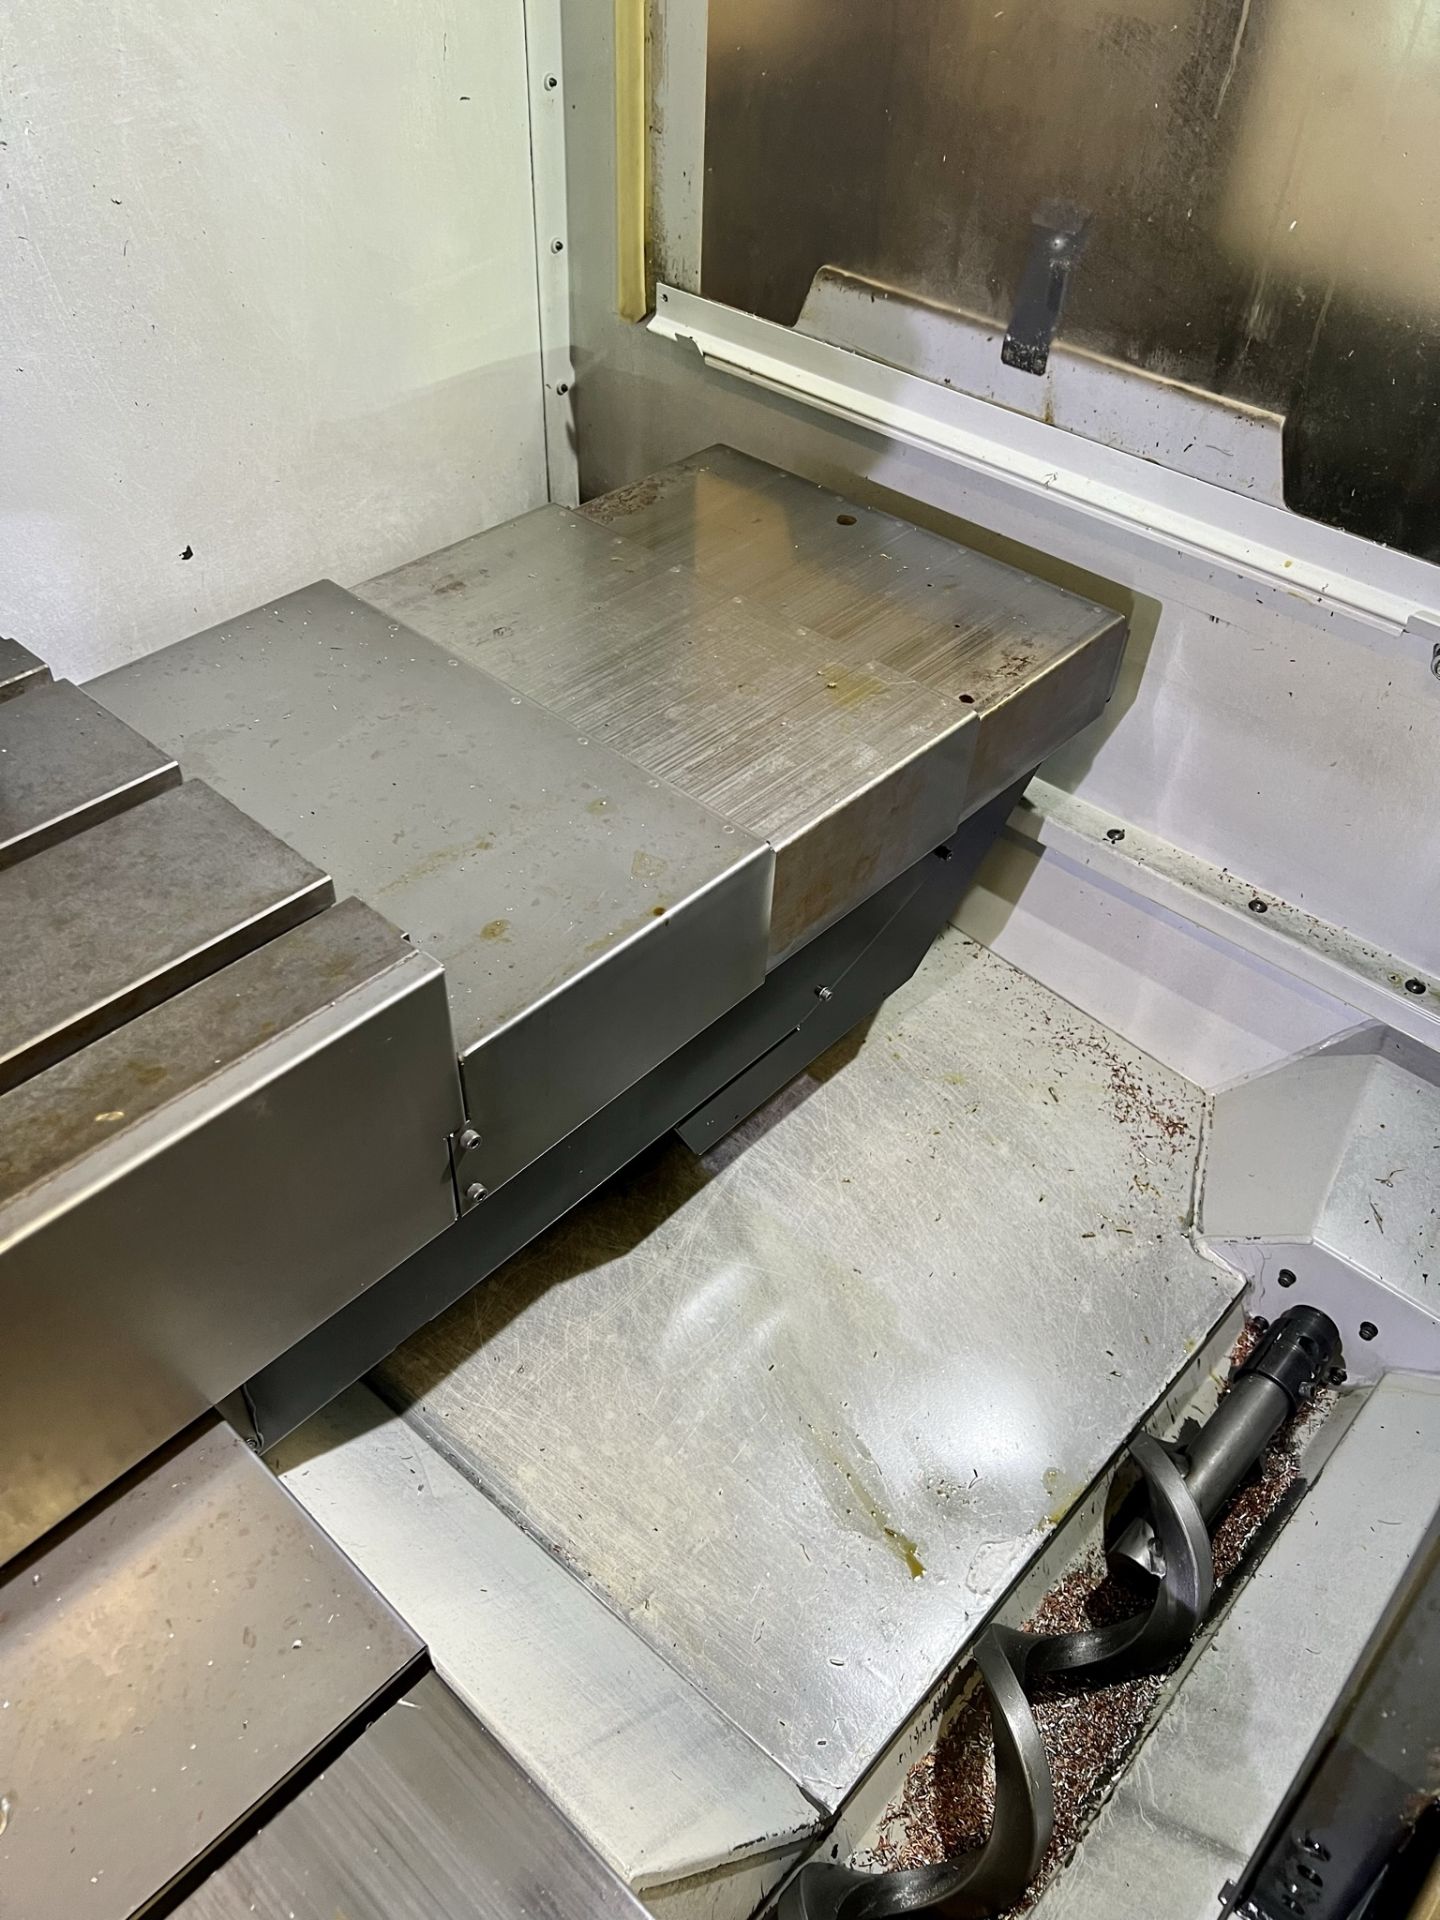 2015 HAAS VF-2 VERTICAL MACHINING CENTER, XYZ TRAVELS: 30" X 16" X 20", 36" X 14" TABLE, PROBING - Image 8 of 24